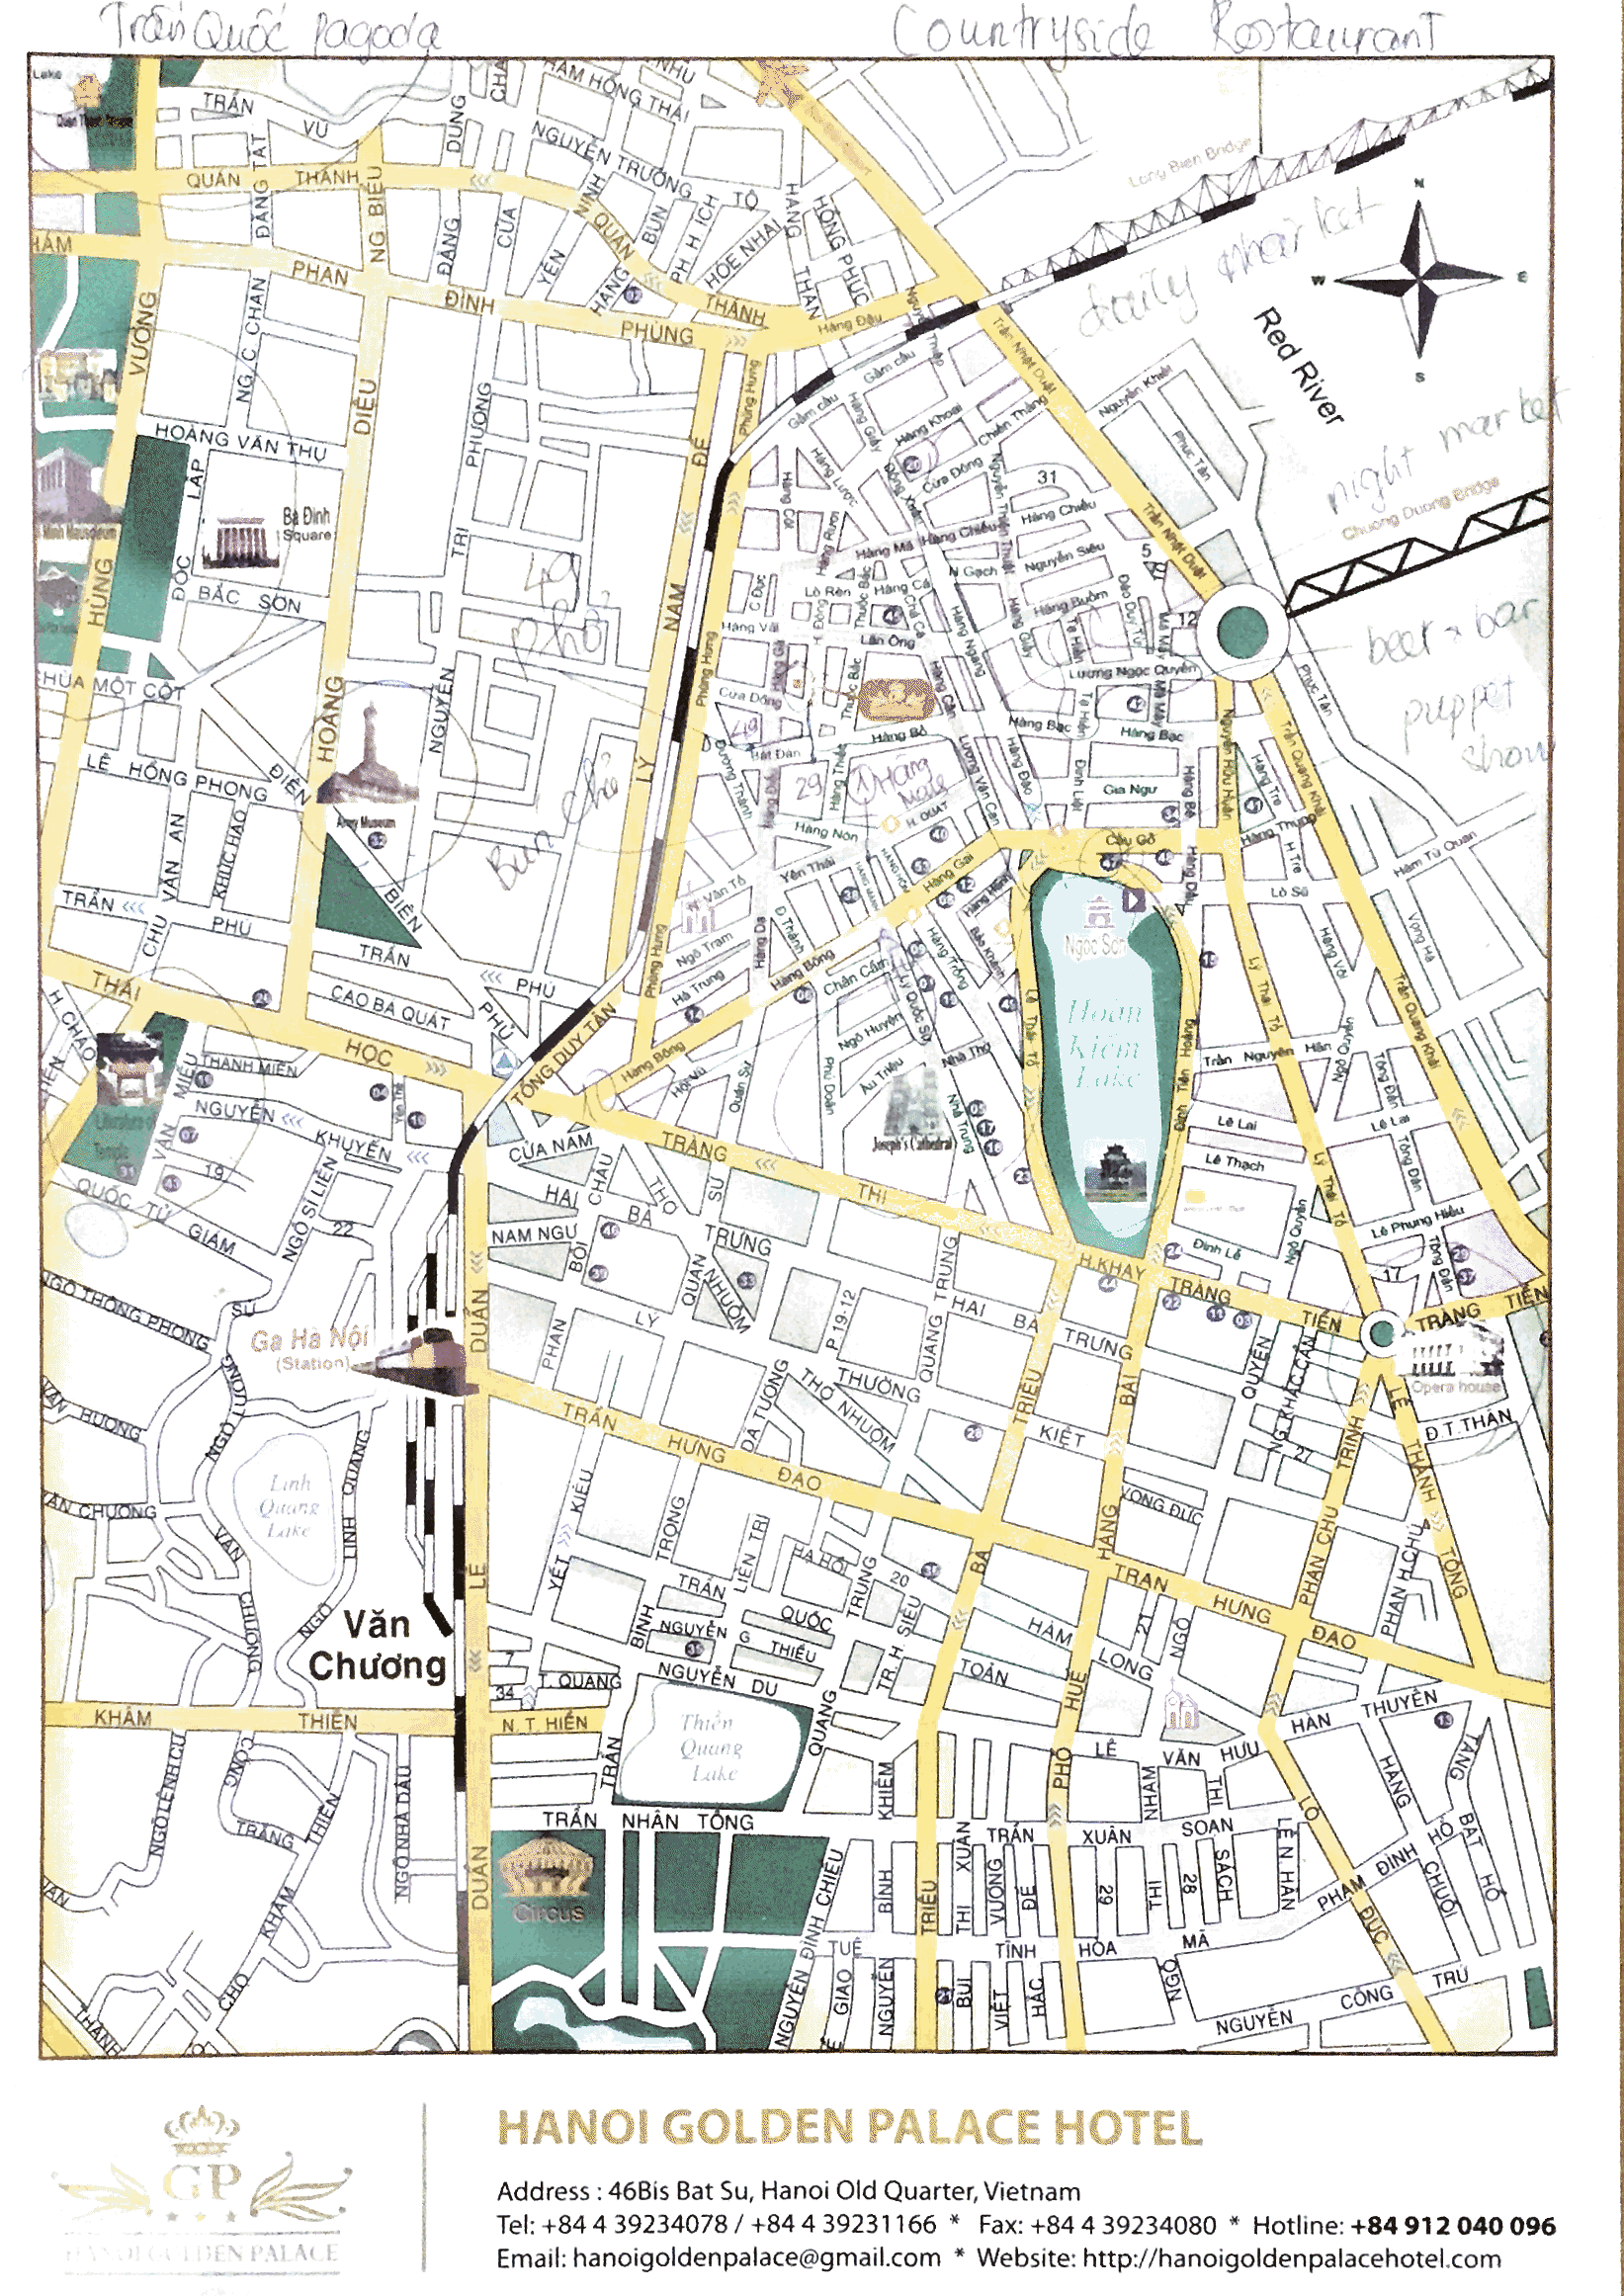 Map of the local area provided by the hotel with some key local points of interest highlighted